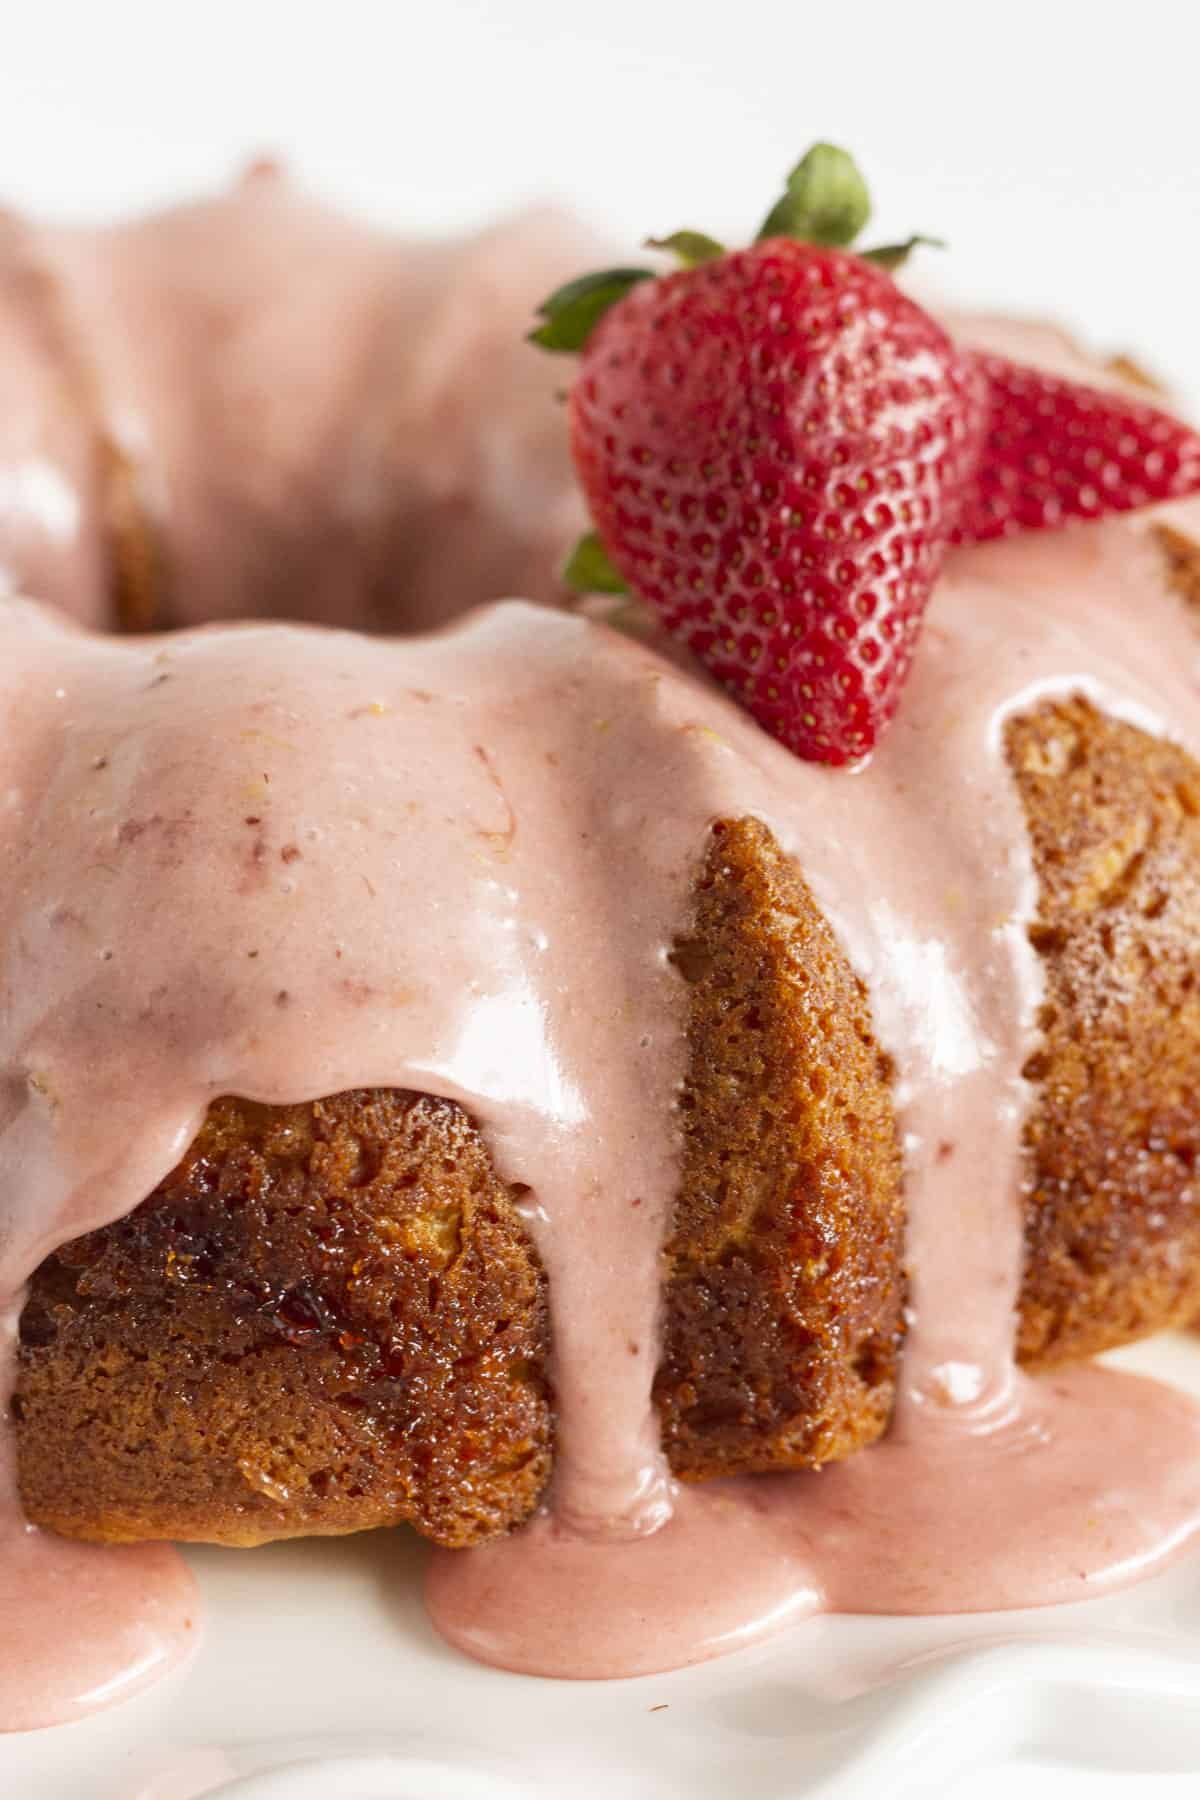 A finished strawberry lemonade bundt cake with a couple fresh strawberries on top.